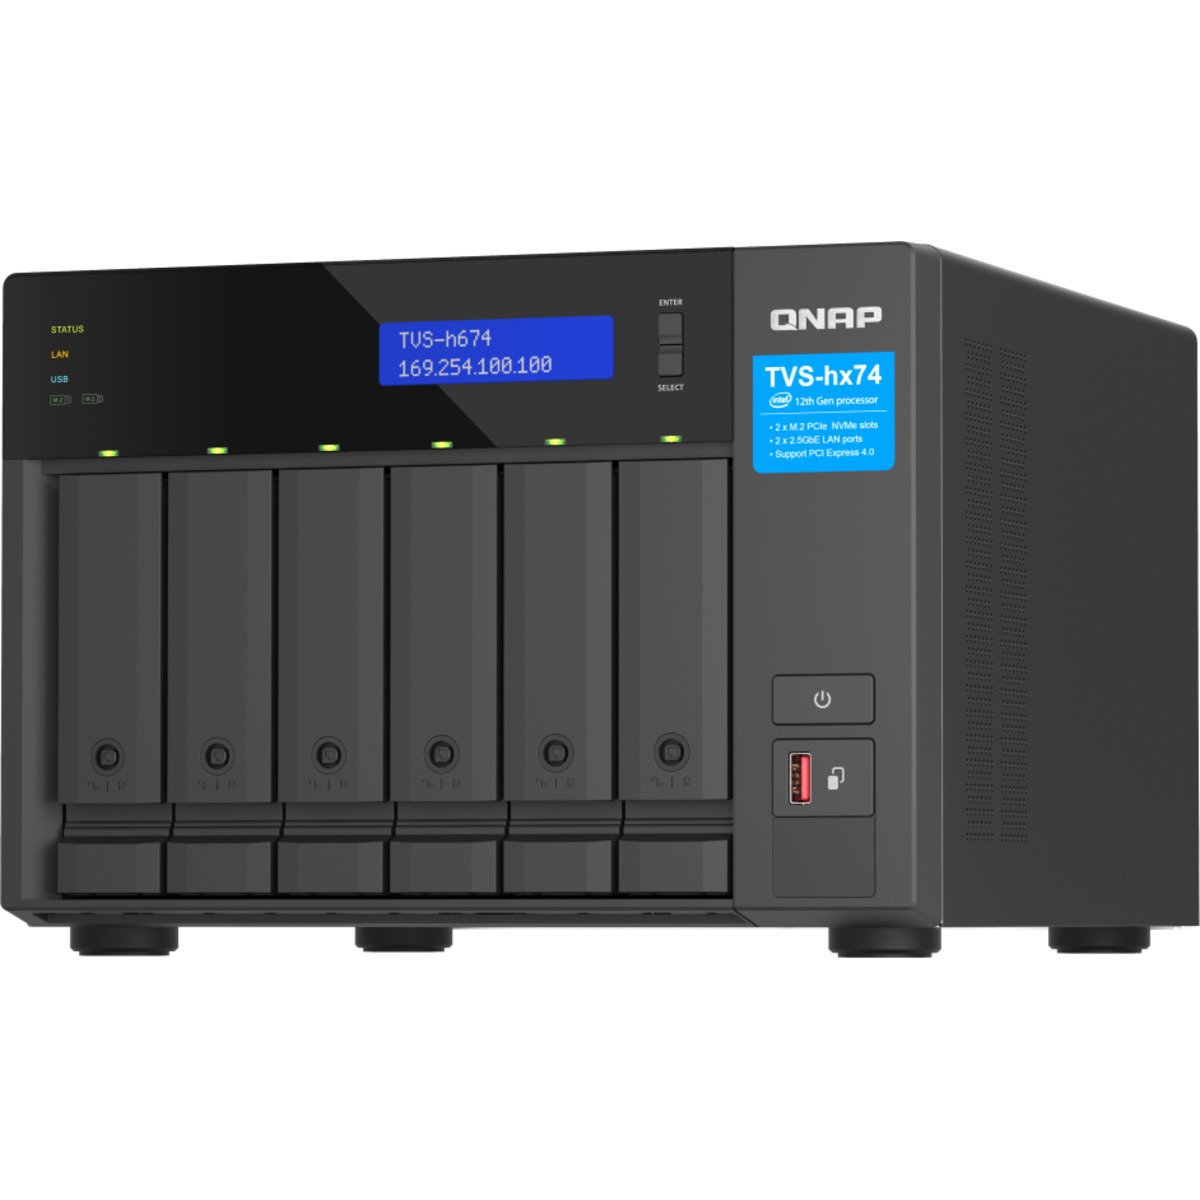 QNAP TVS-h674 Core i5 36tb 6-Bay Desktop Multimedia / Power User / Business NAS - Network Attached Storage Device 3x12tb Seagate IronWolf ST12000VN0008 3.5 7200rpm SATA 6Gb/s HDD NAS Class Drives Installed - Burn-In Tested TVS-h674 Core i5